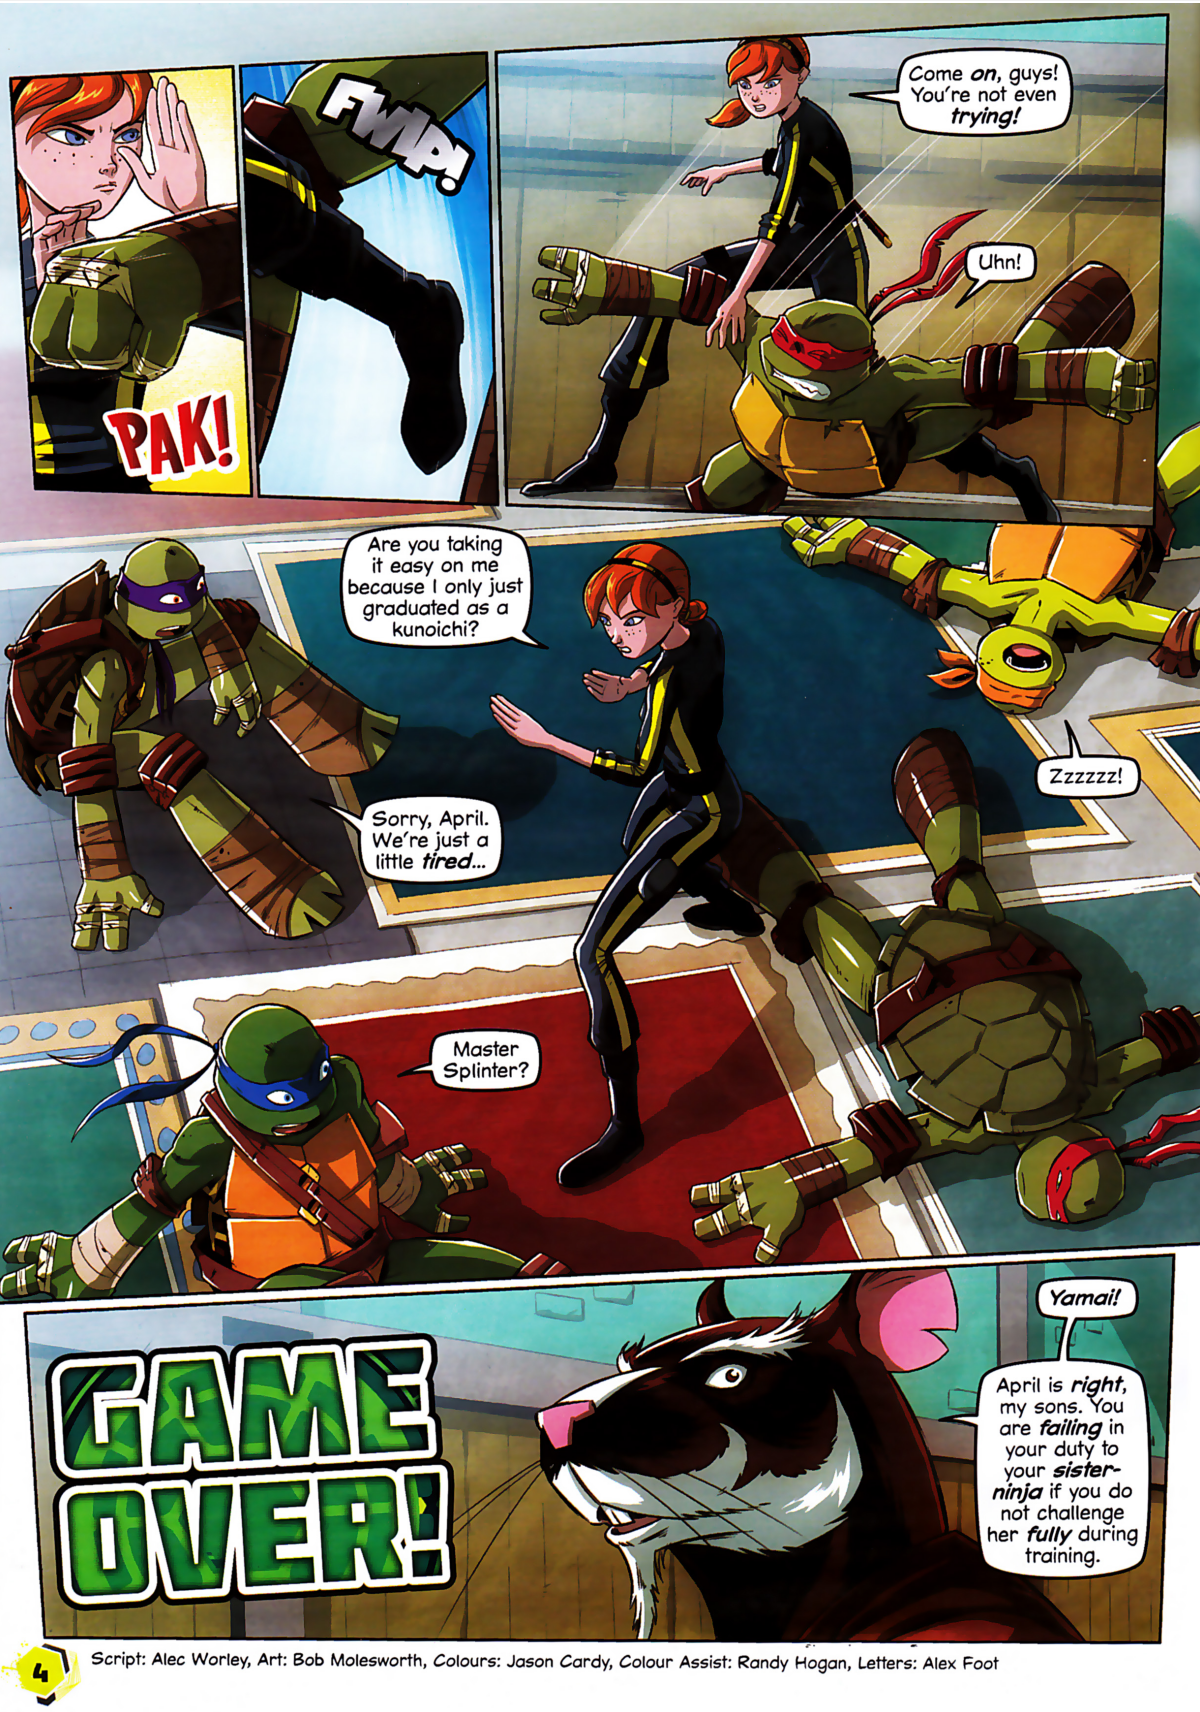 https://static.wikia.nocookie.net/tmnt/images/7/7a/GameOver-Panini-iss56title.png/revision/latest?cb=20230401015557